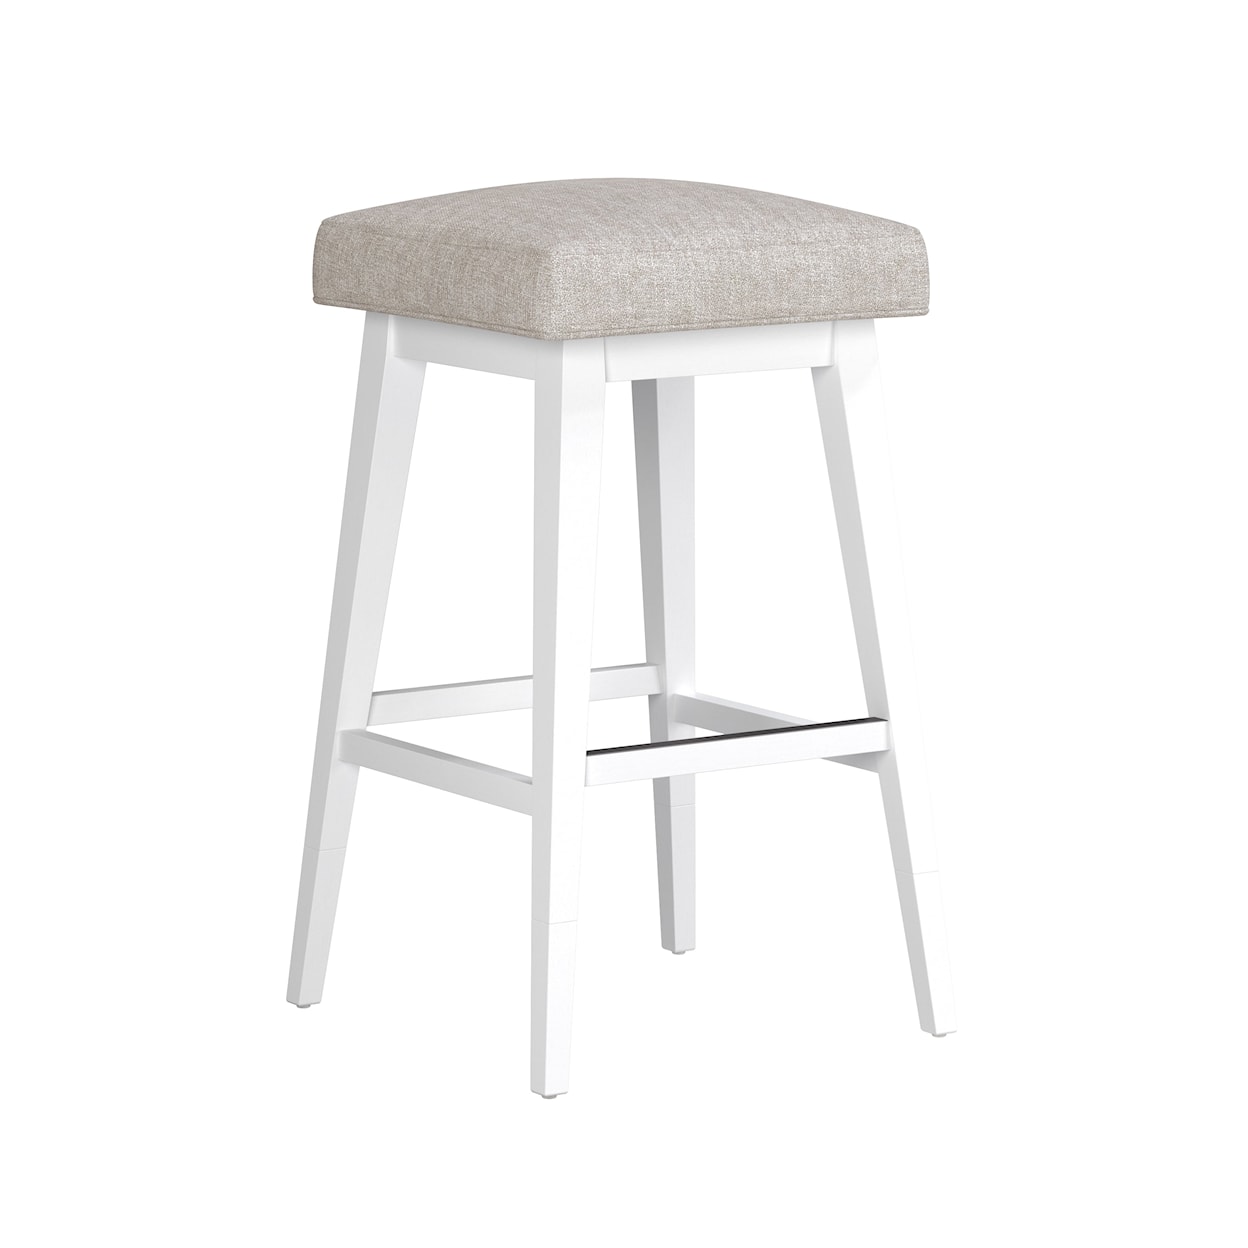 Hillsdale Uniquely Yours Backless Adjustable Swivel Stool